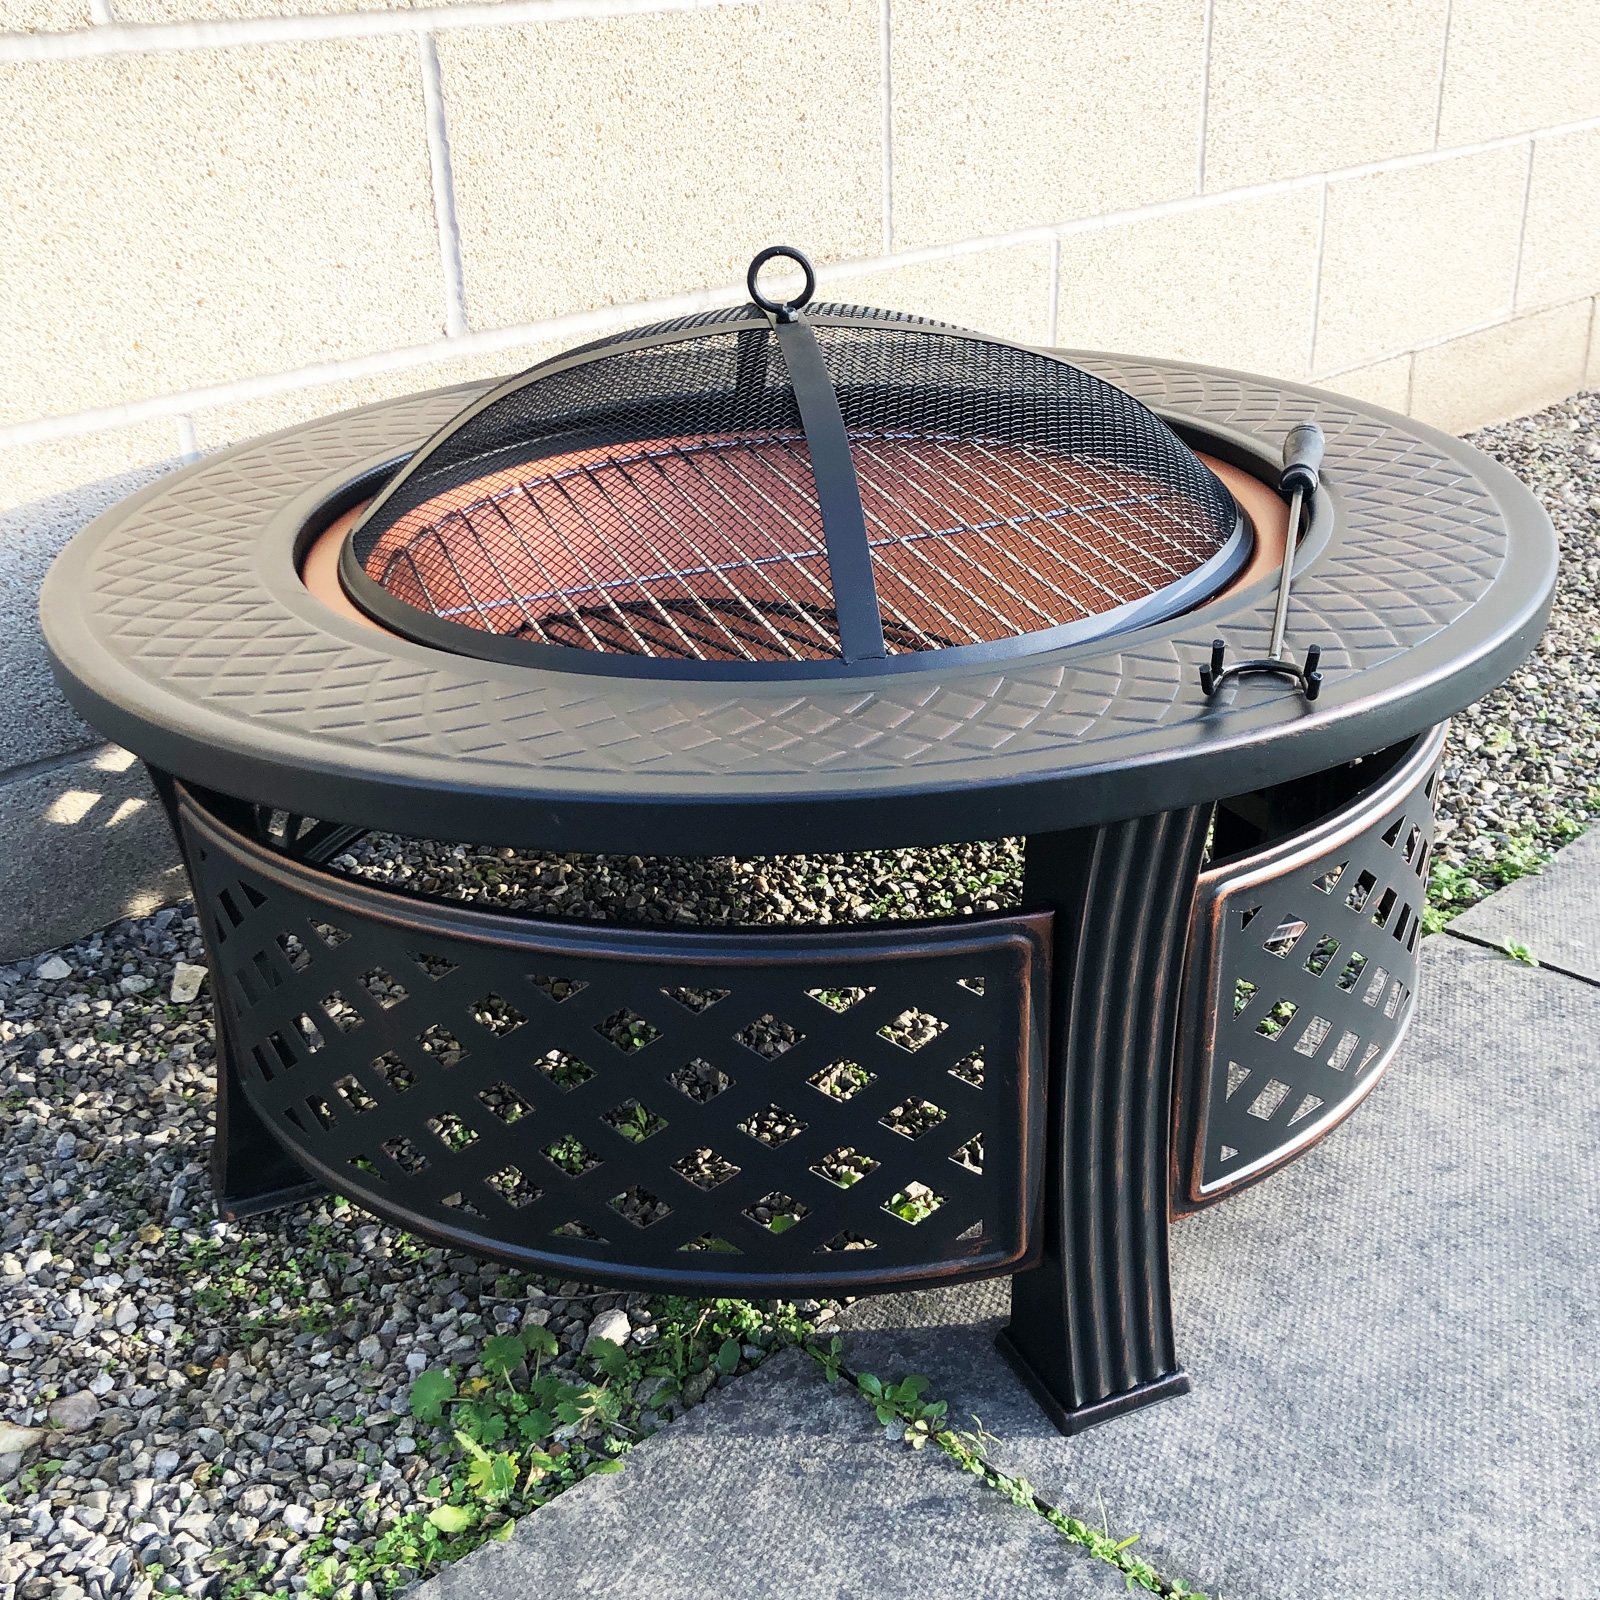 Image of Rotunda 3 in 1 Fire Pit with BBQ Grills and Copper Effect Bowl